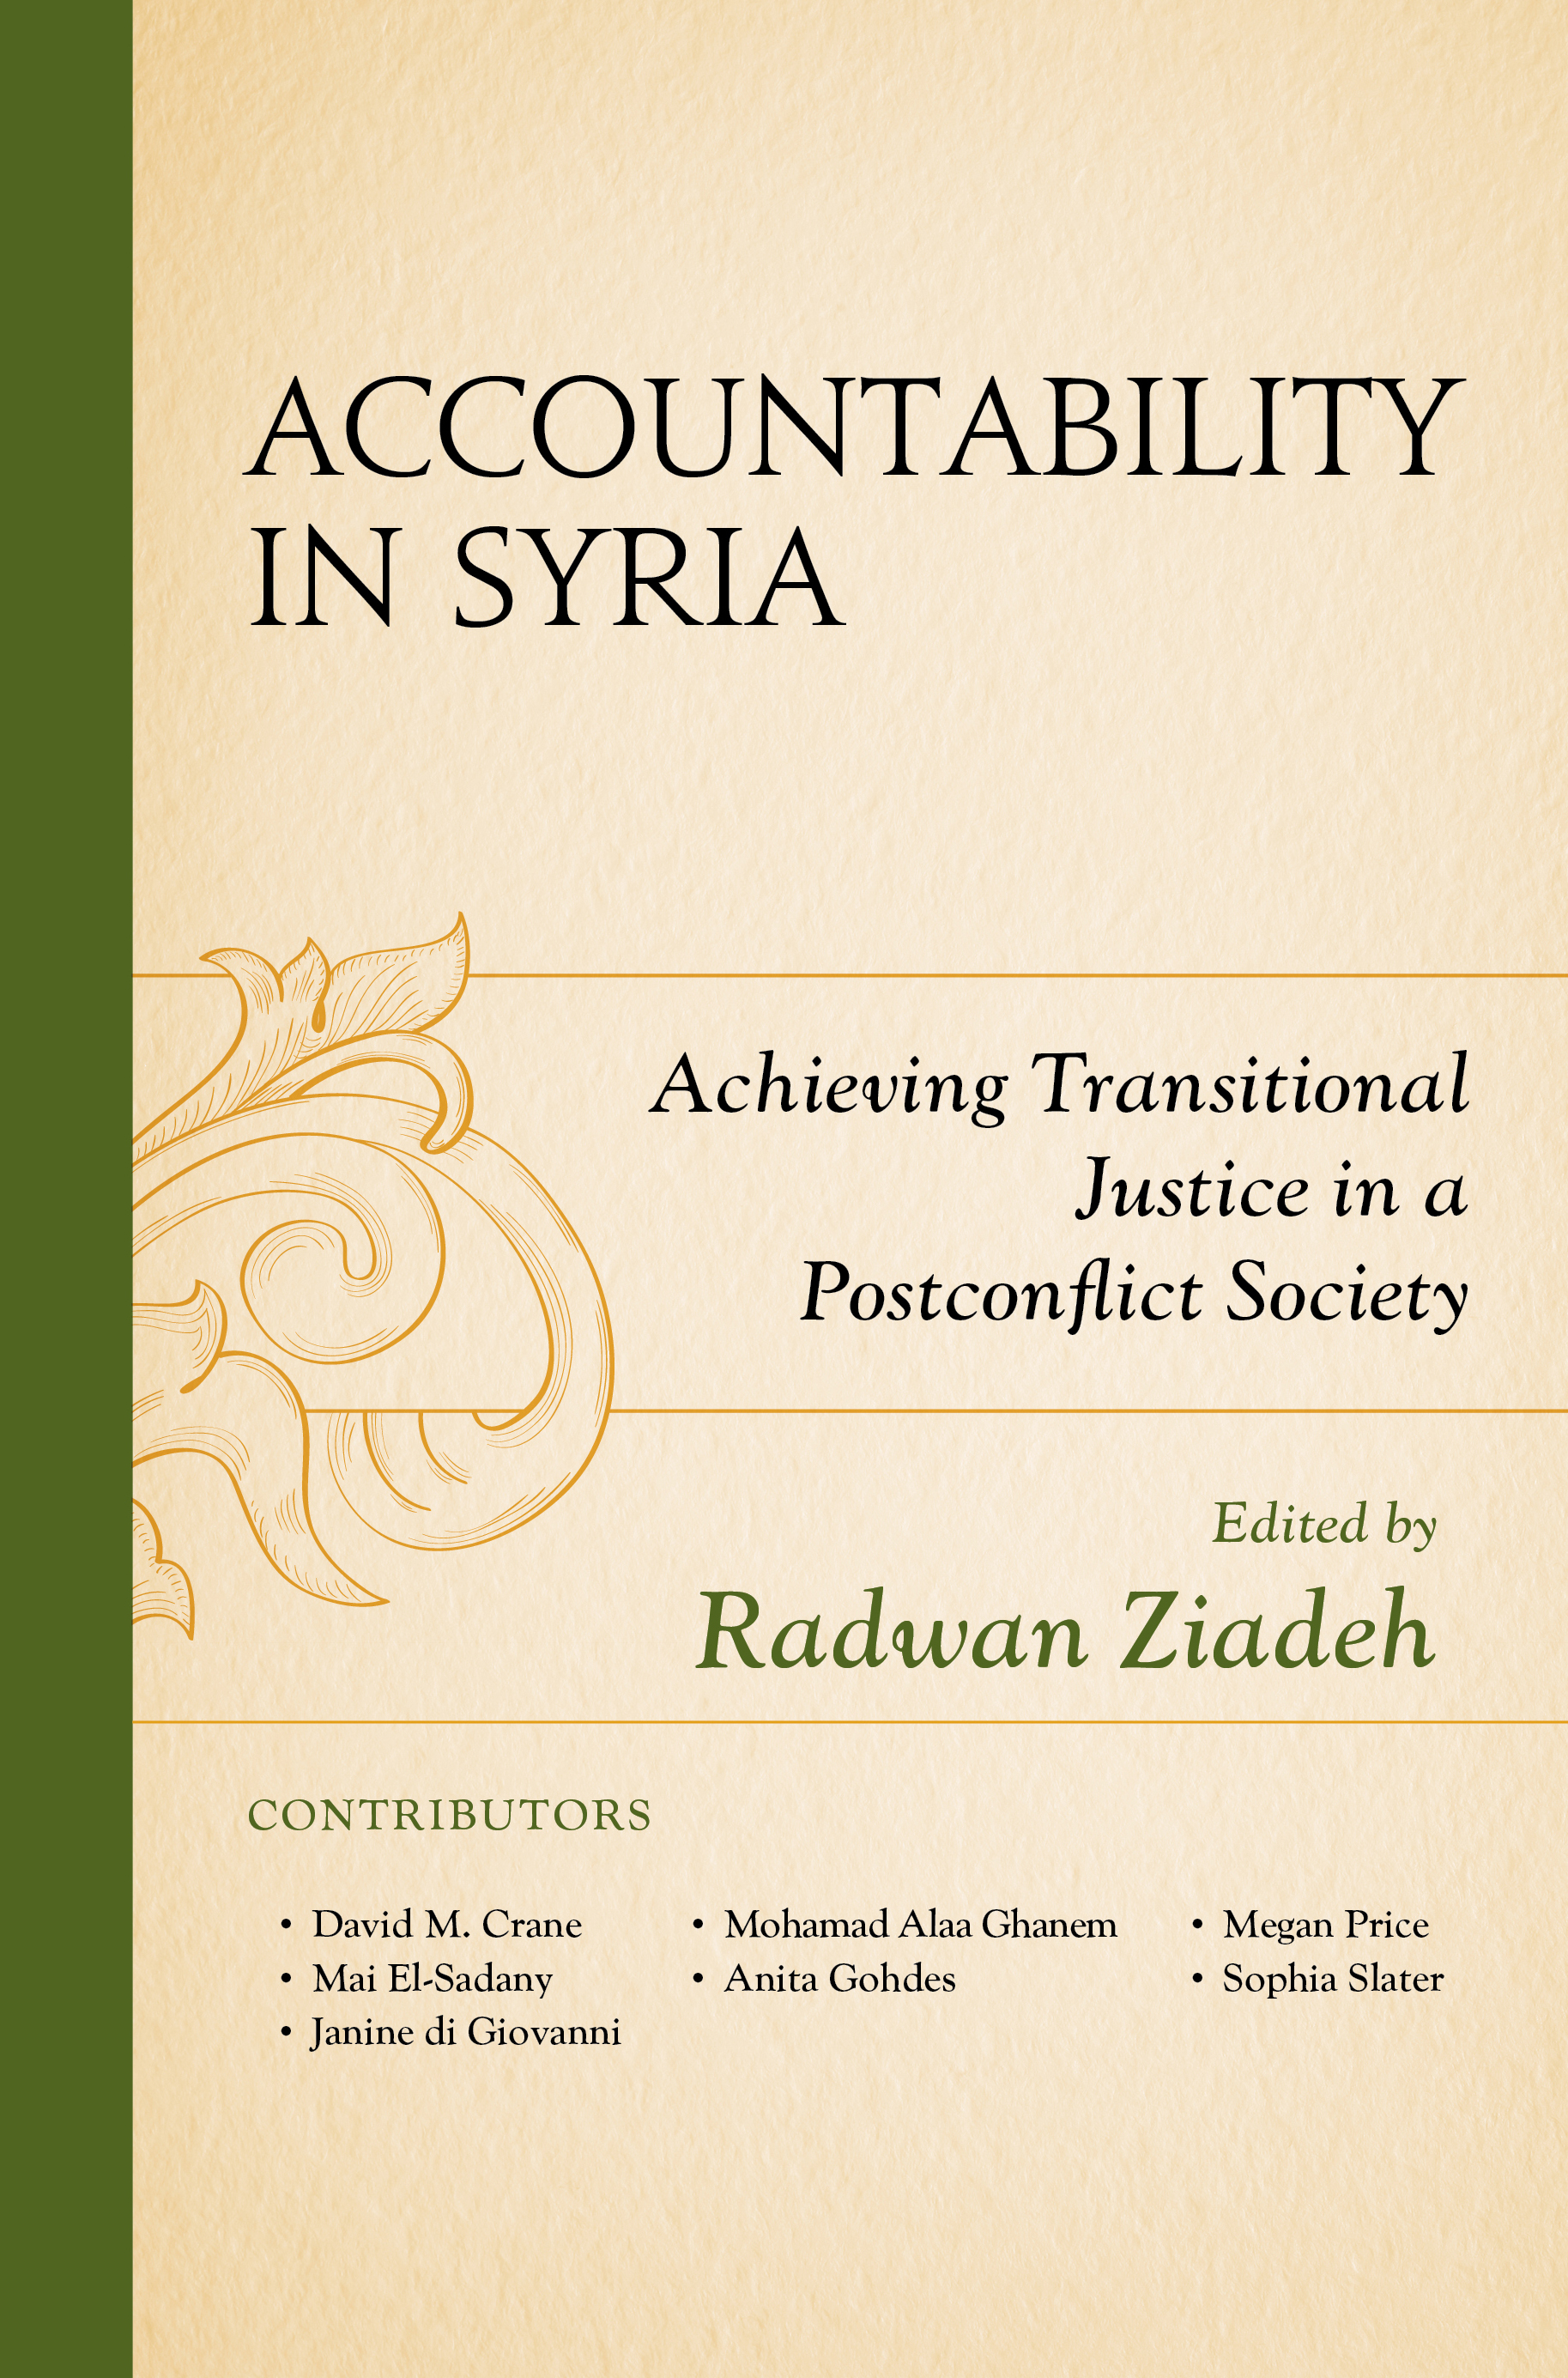 Accountability in Syria: Achieving Transitional Justice in a Postconflict Society